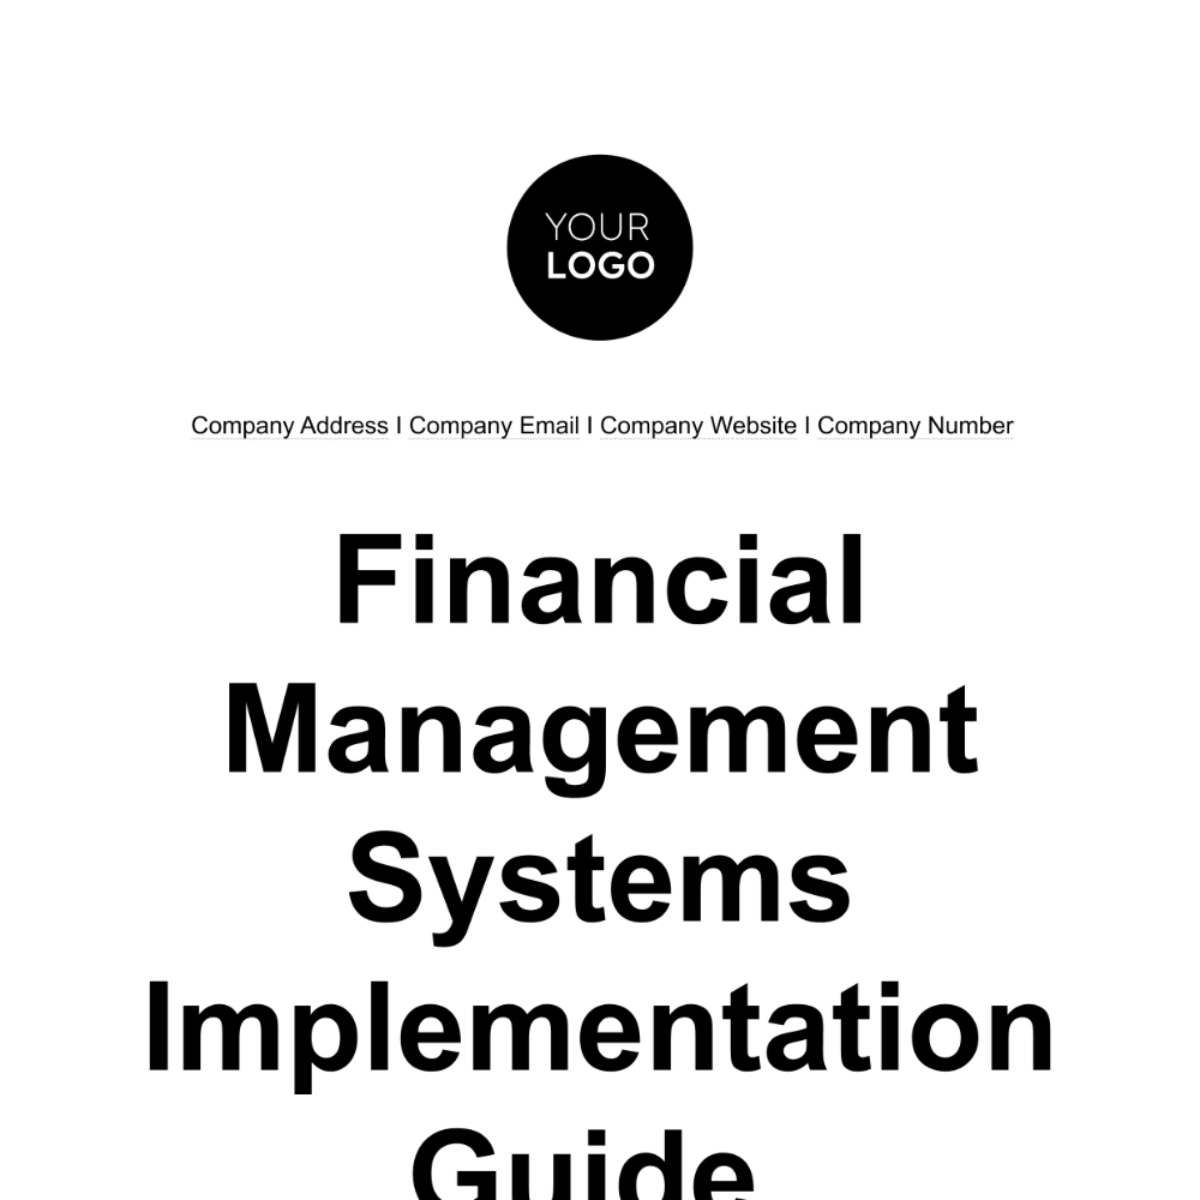 Financial Management Systems Implementation Guide Template